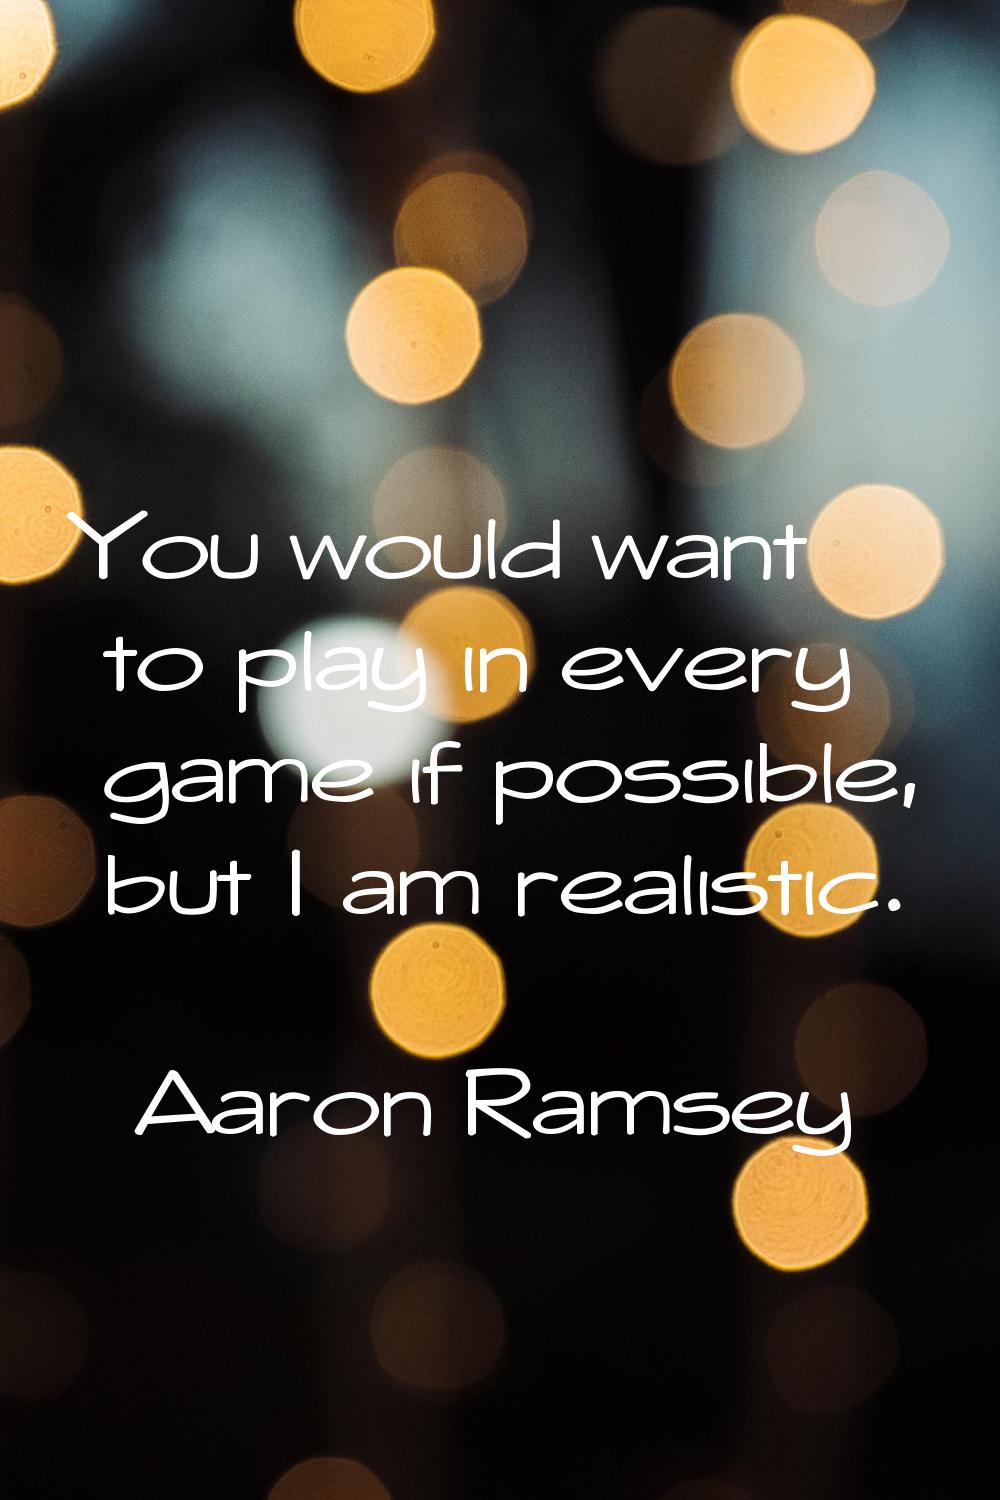 You would want to play in every game if possible, but I am realistic.